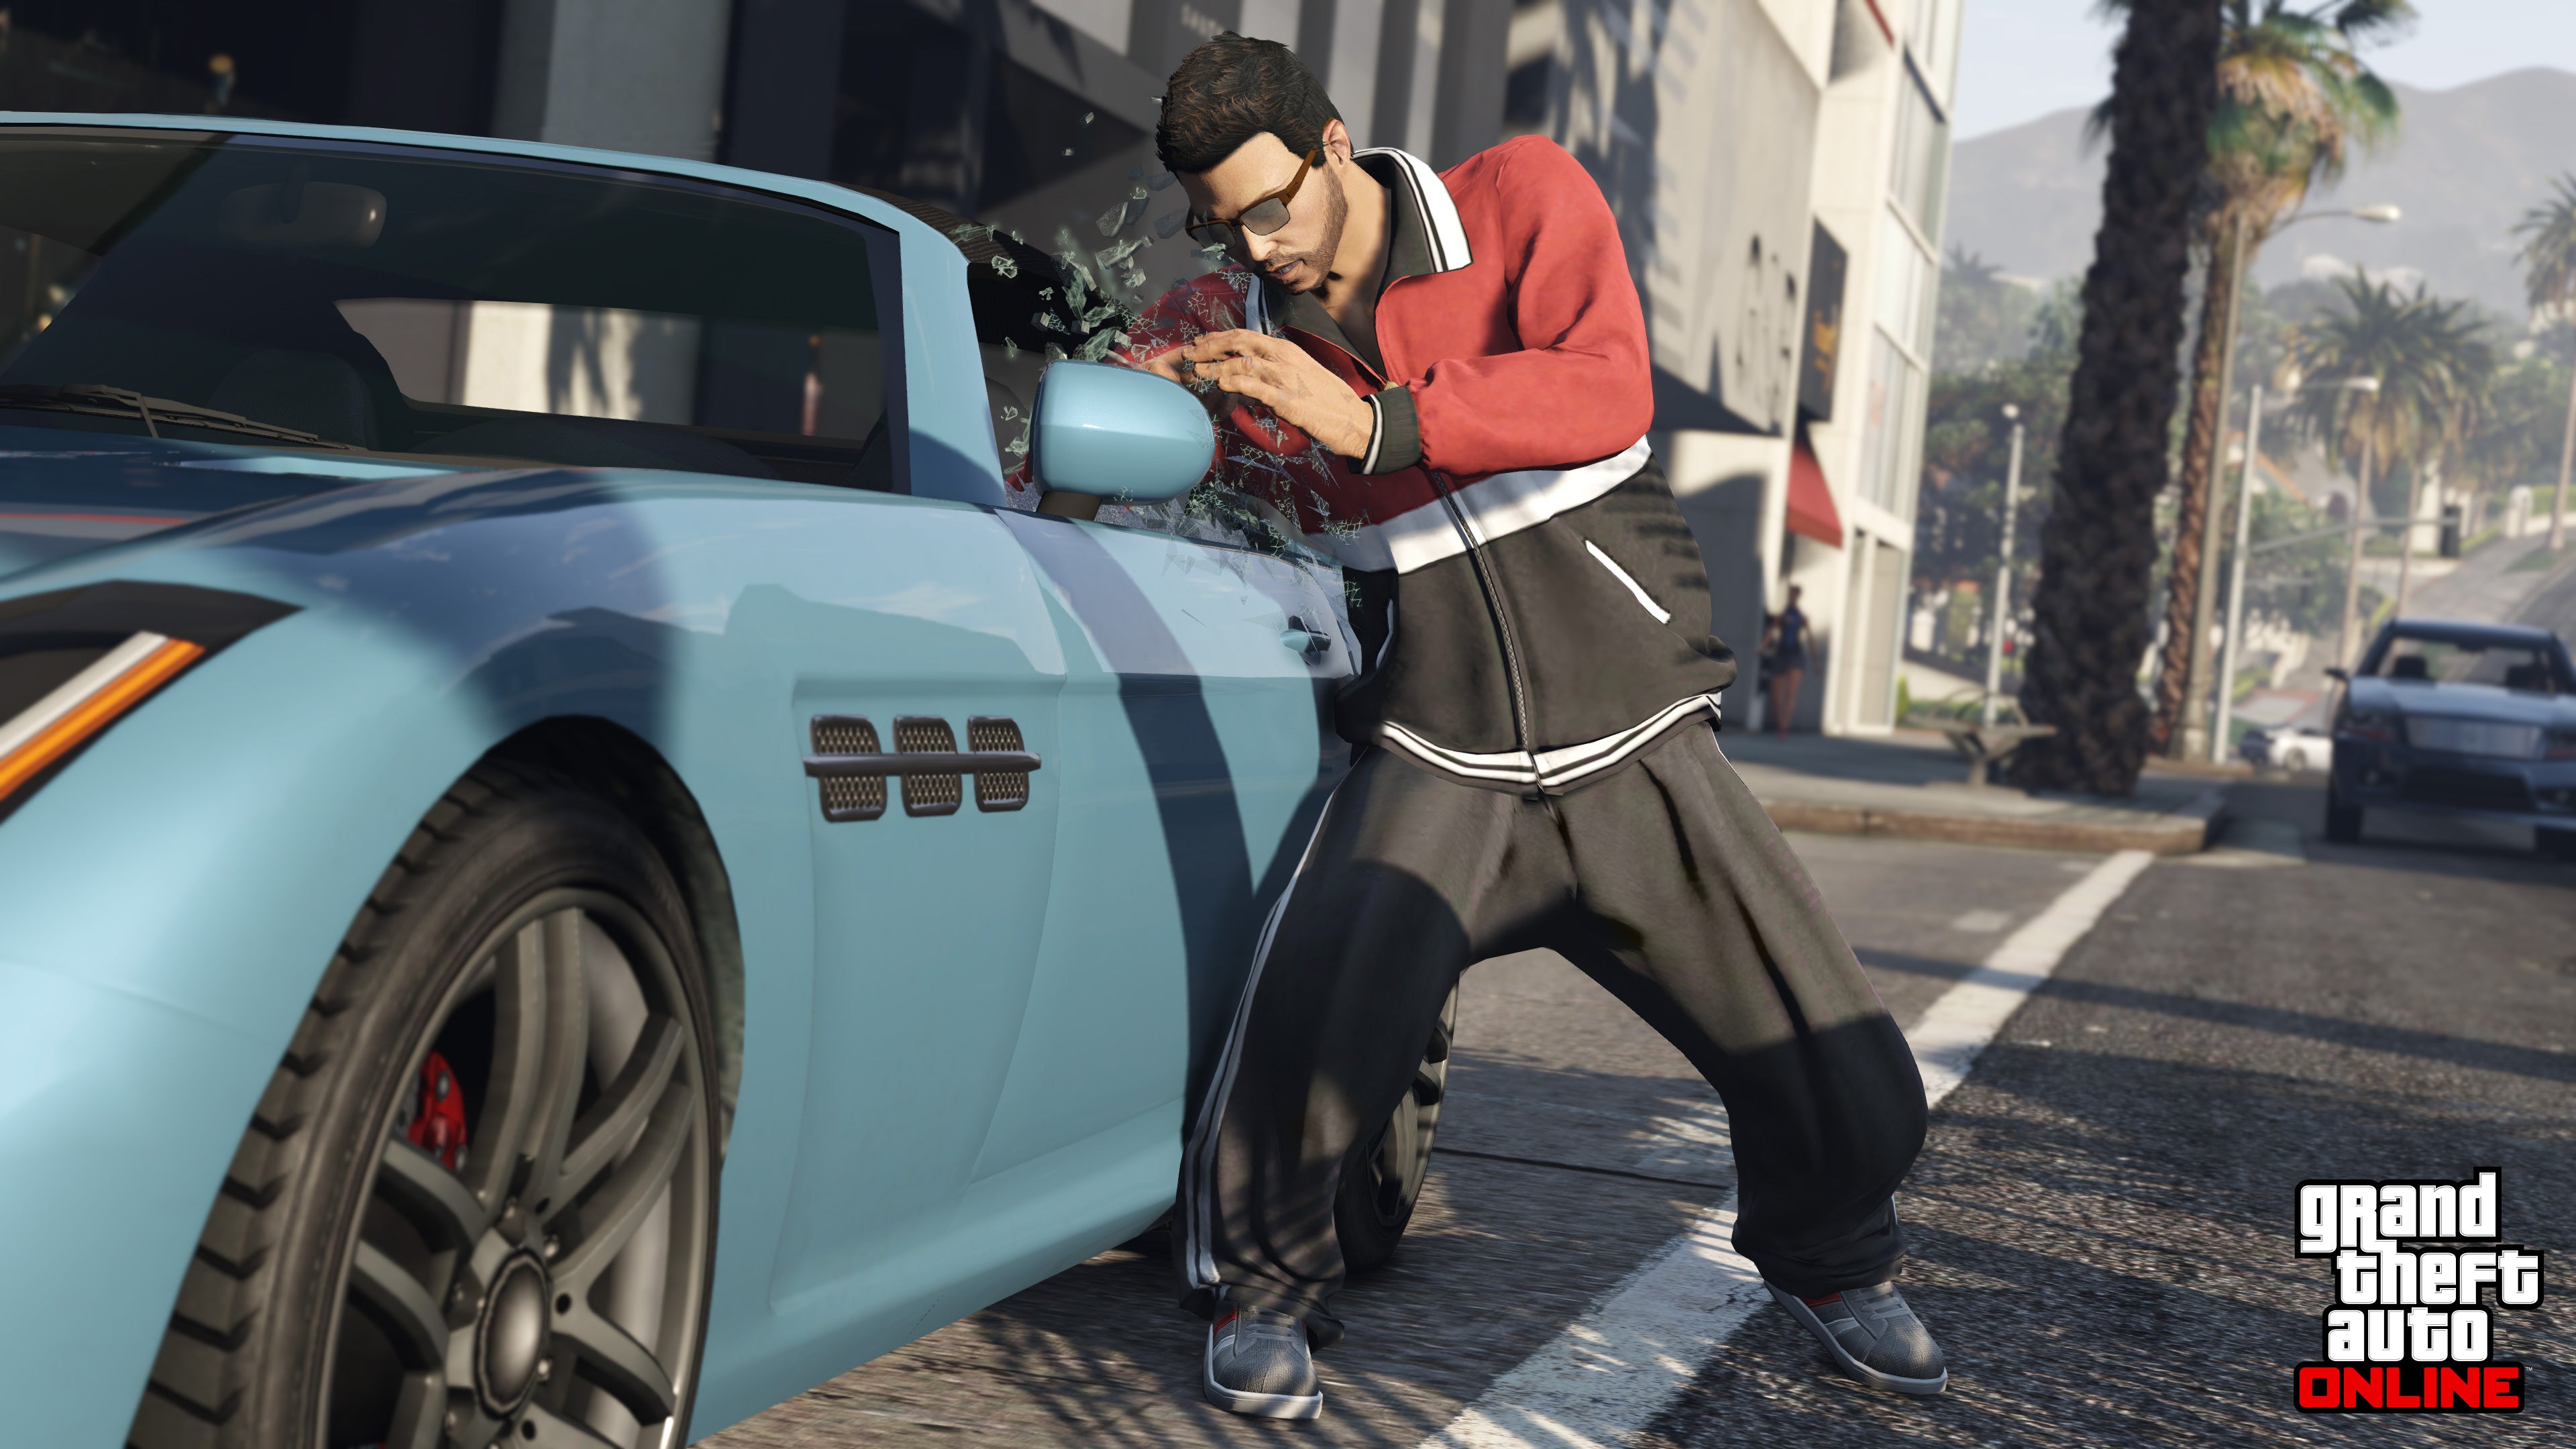 Image for By cycling GTA Online Jobs and Adversary modes, Rockstar is freeing up space for new missions and modes